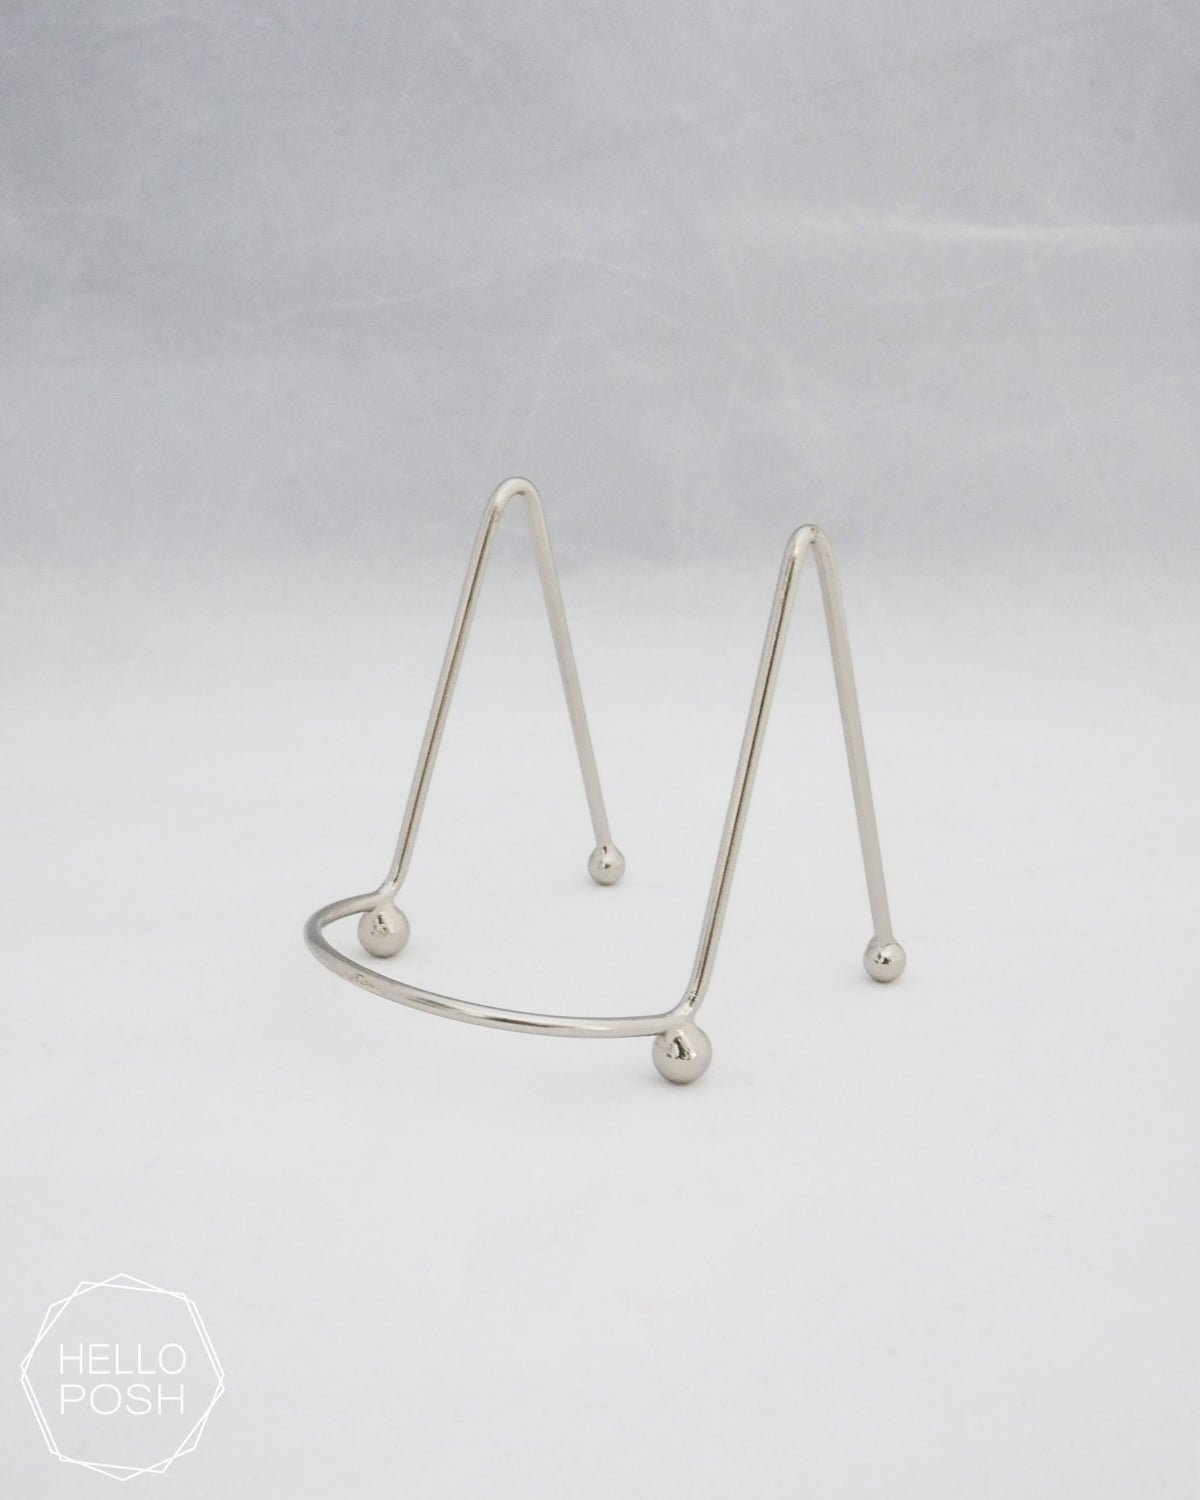 Small silver easels; metal display stands